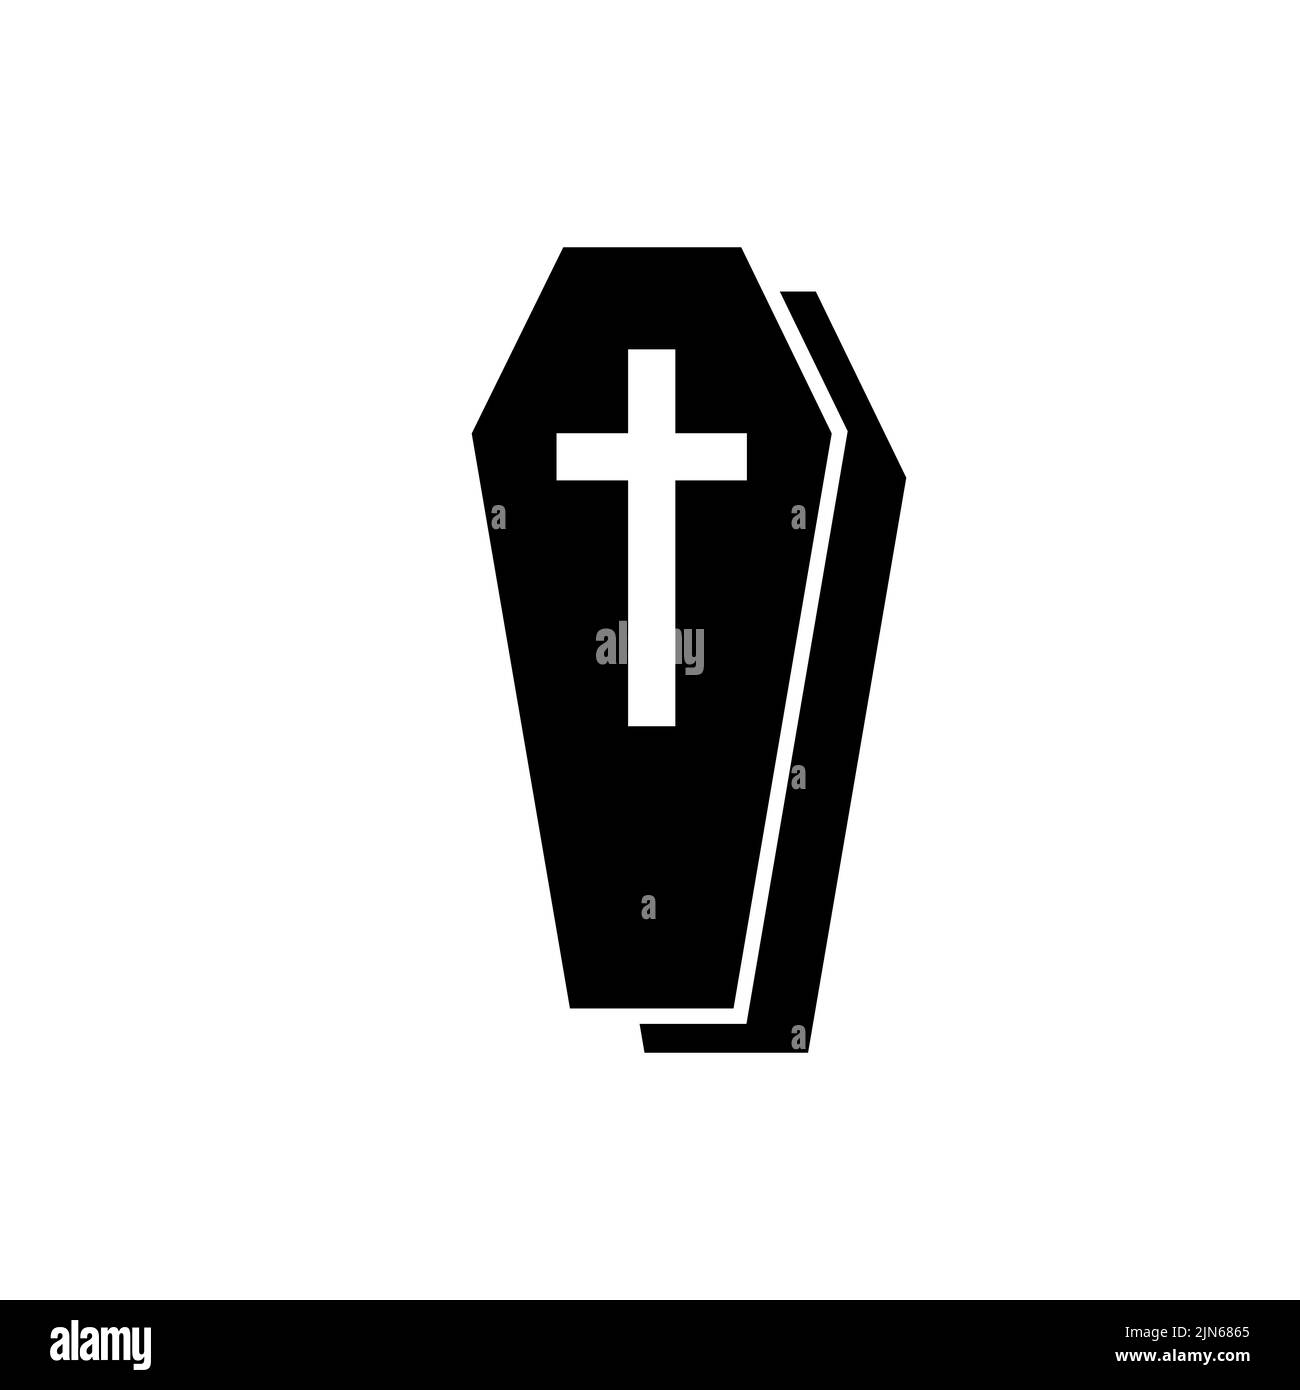 Coffin icon. Wooden coffin black icon with cross. Coffin isolated symbol. Vector illustration. Stock Vector